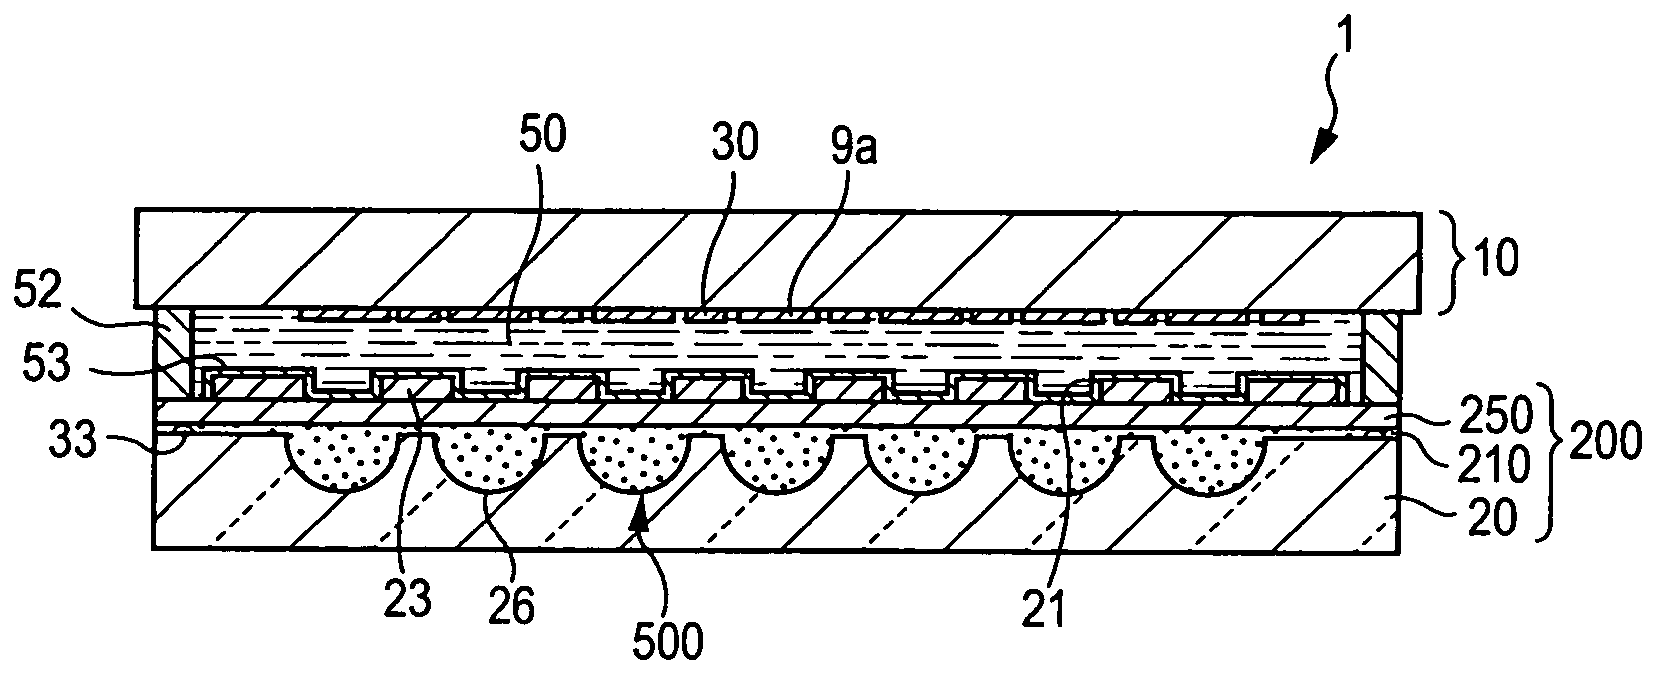 Electro-optical device, method of manufacturing the same, and electronic apparatus using electro-optical device